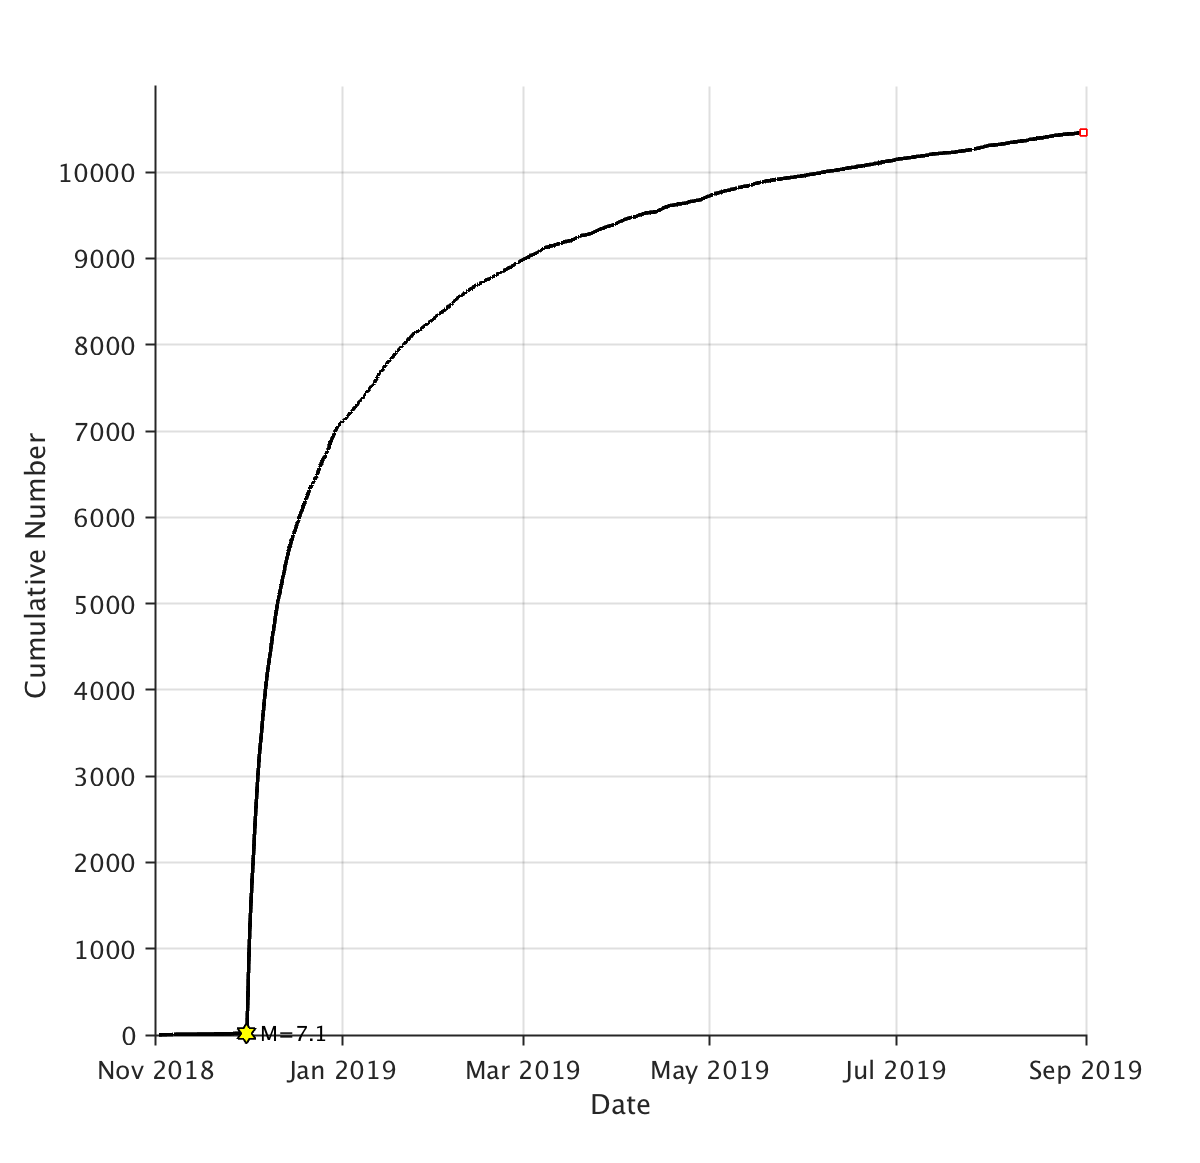 Line graph with cumulative number of earthquakes on vertical axis, dates on horizontal axis. From November 2018 to January 2019, the line rises steeply to 7,000 aftershocks, then starts a more gradual curve to more than 10,000 aftershocks in September 2019.